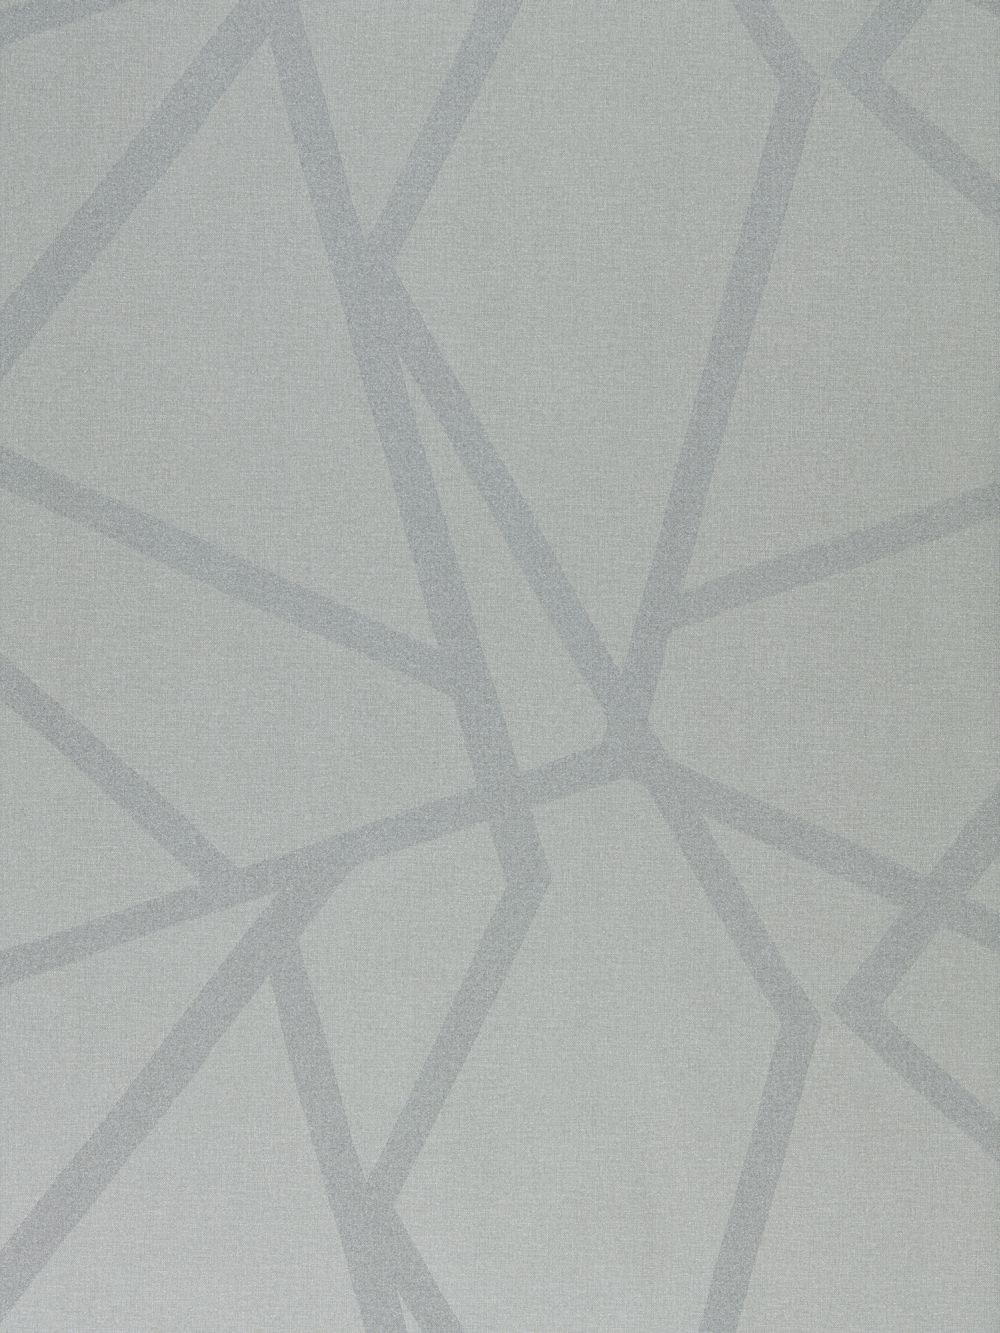 Sumi Beaded Wallpaper - Silver - by Harlequin